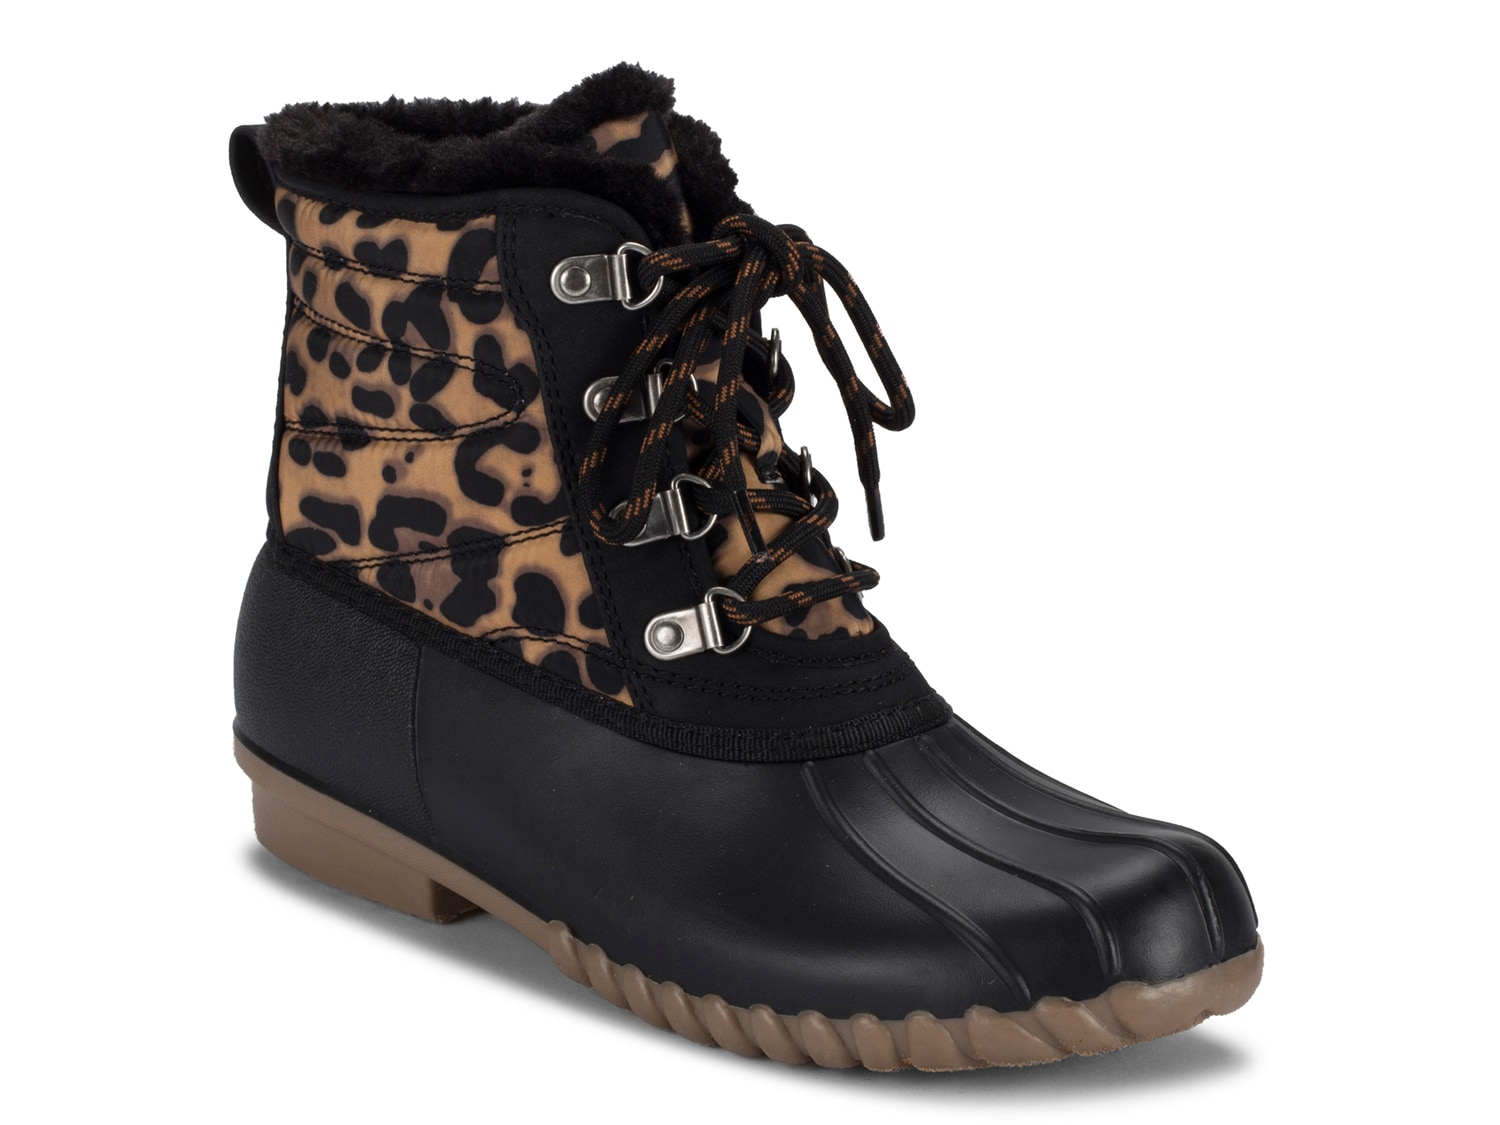 Comfortable winter shoes: A leopard print boot with laces.